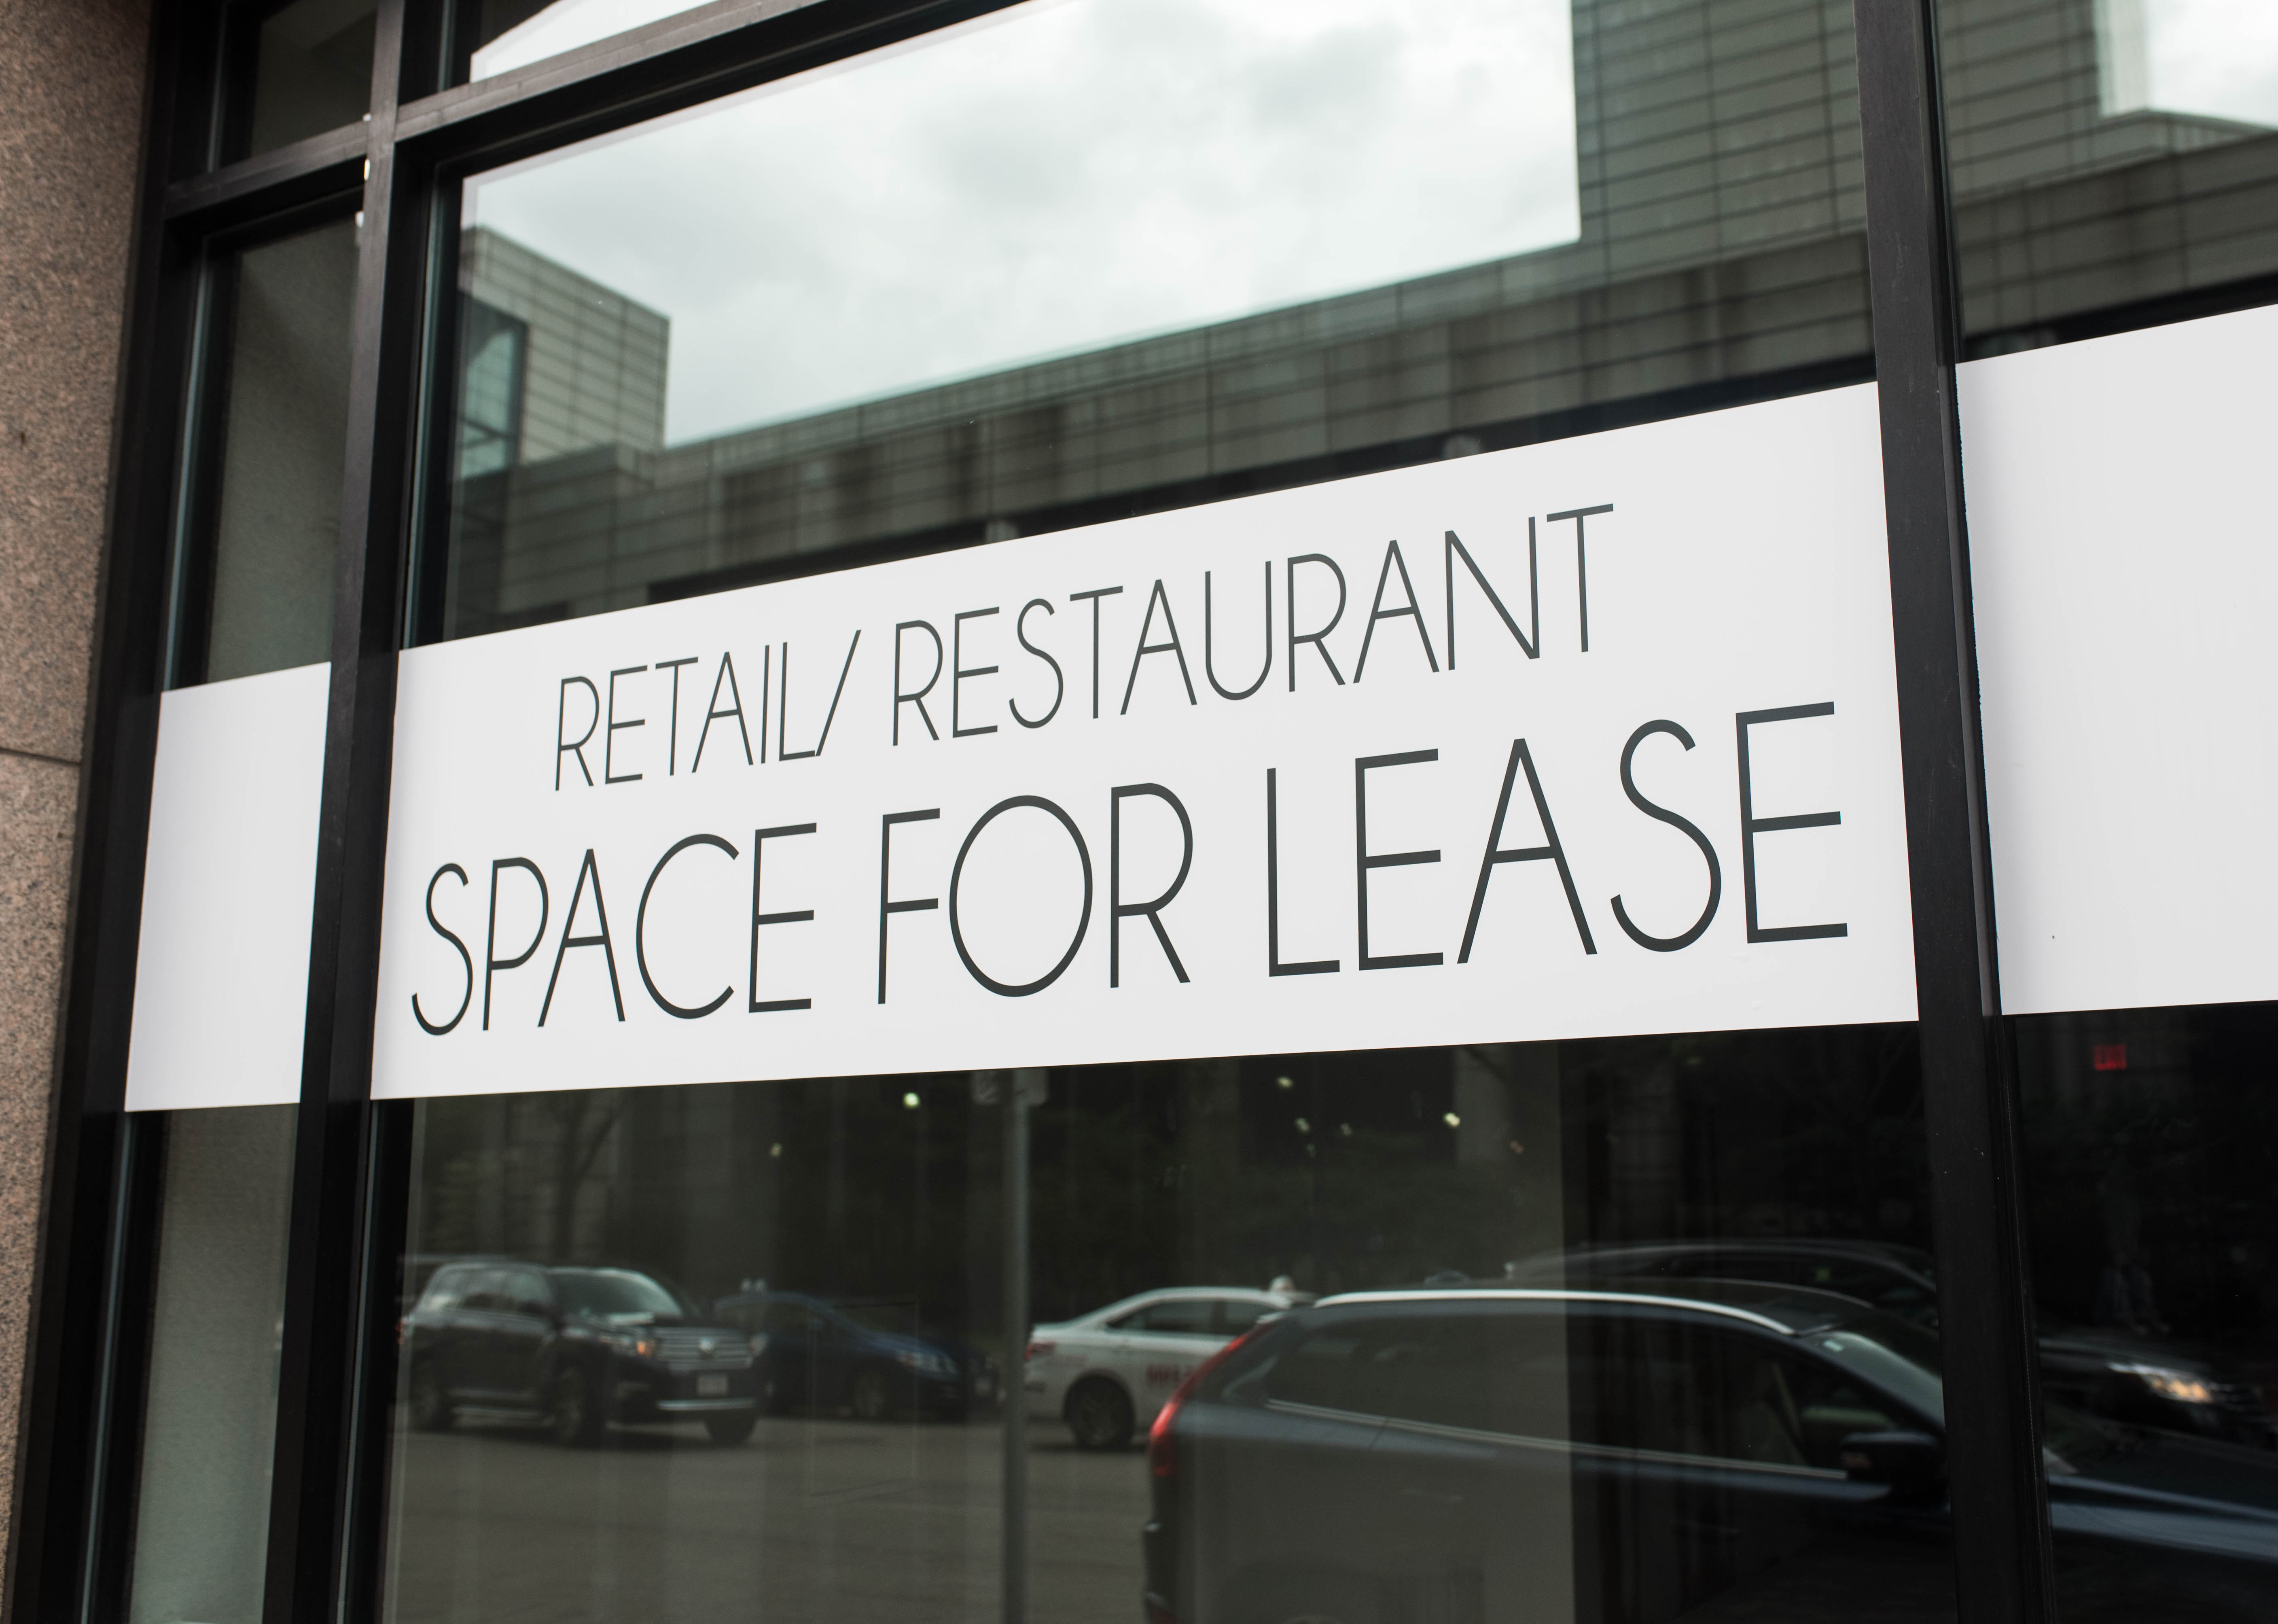 Retail/restaurant space for lease window graphics